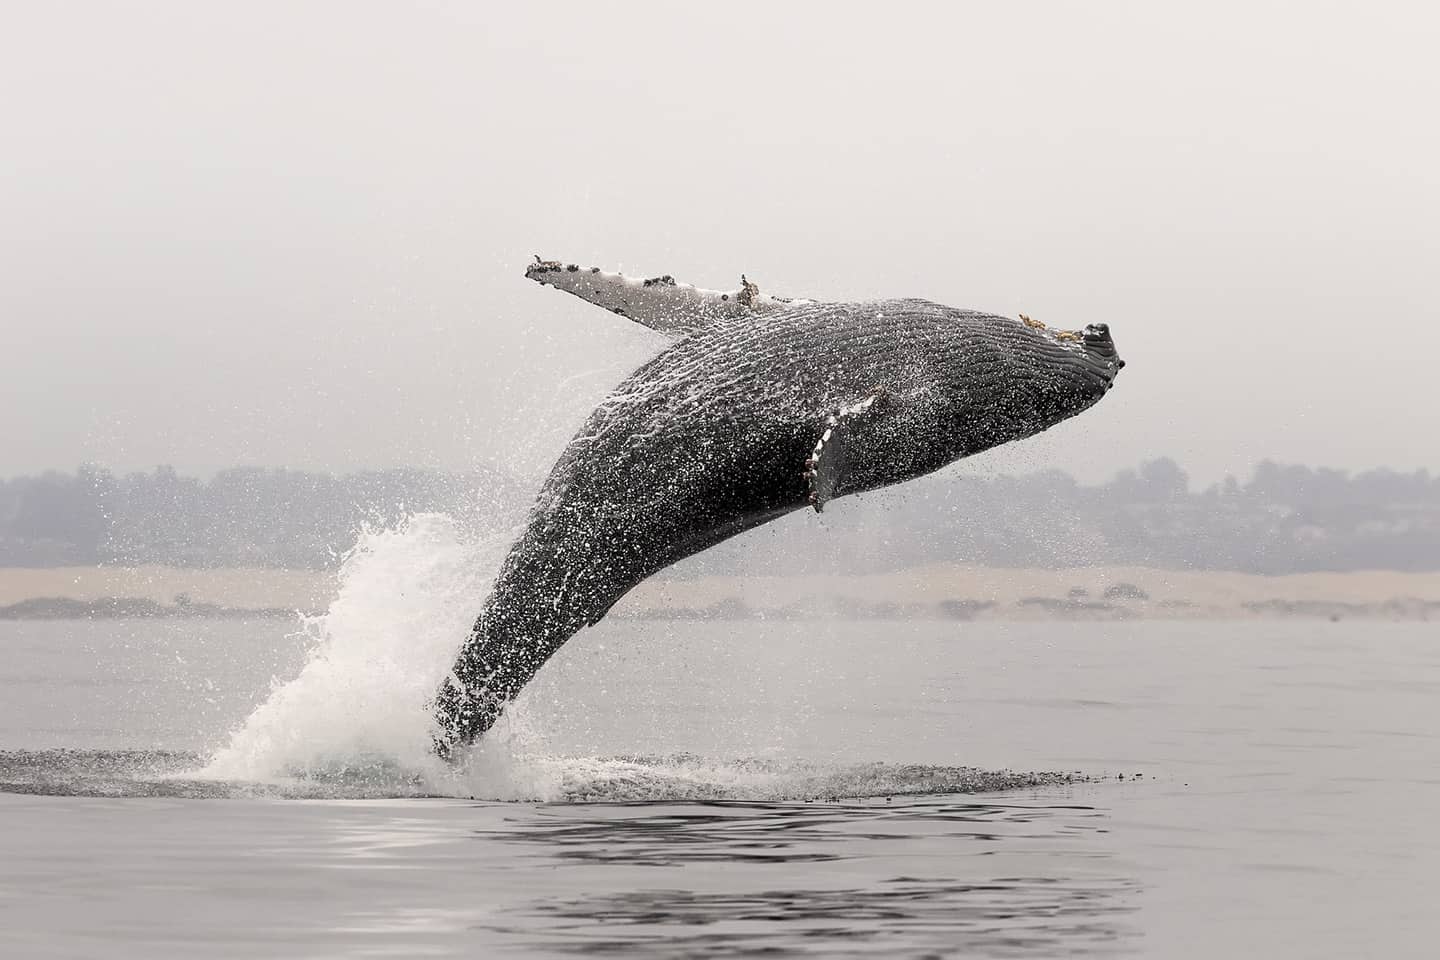 Breaching whale photo courtesy of Vincent Shay Photography, photo credit required